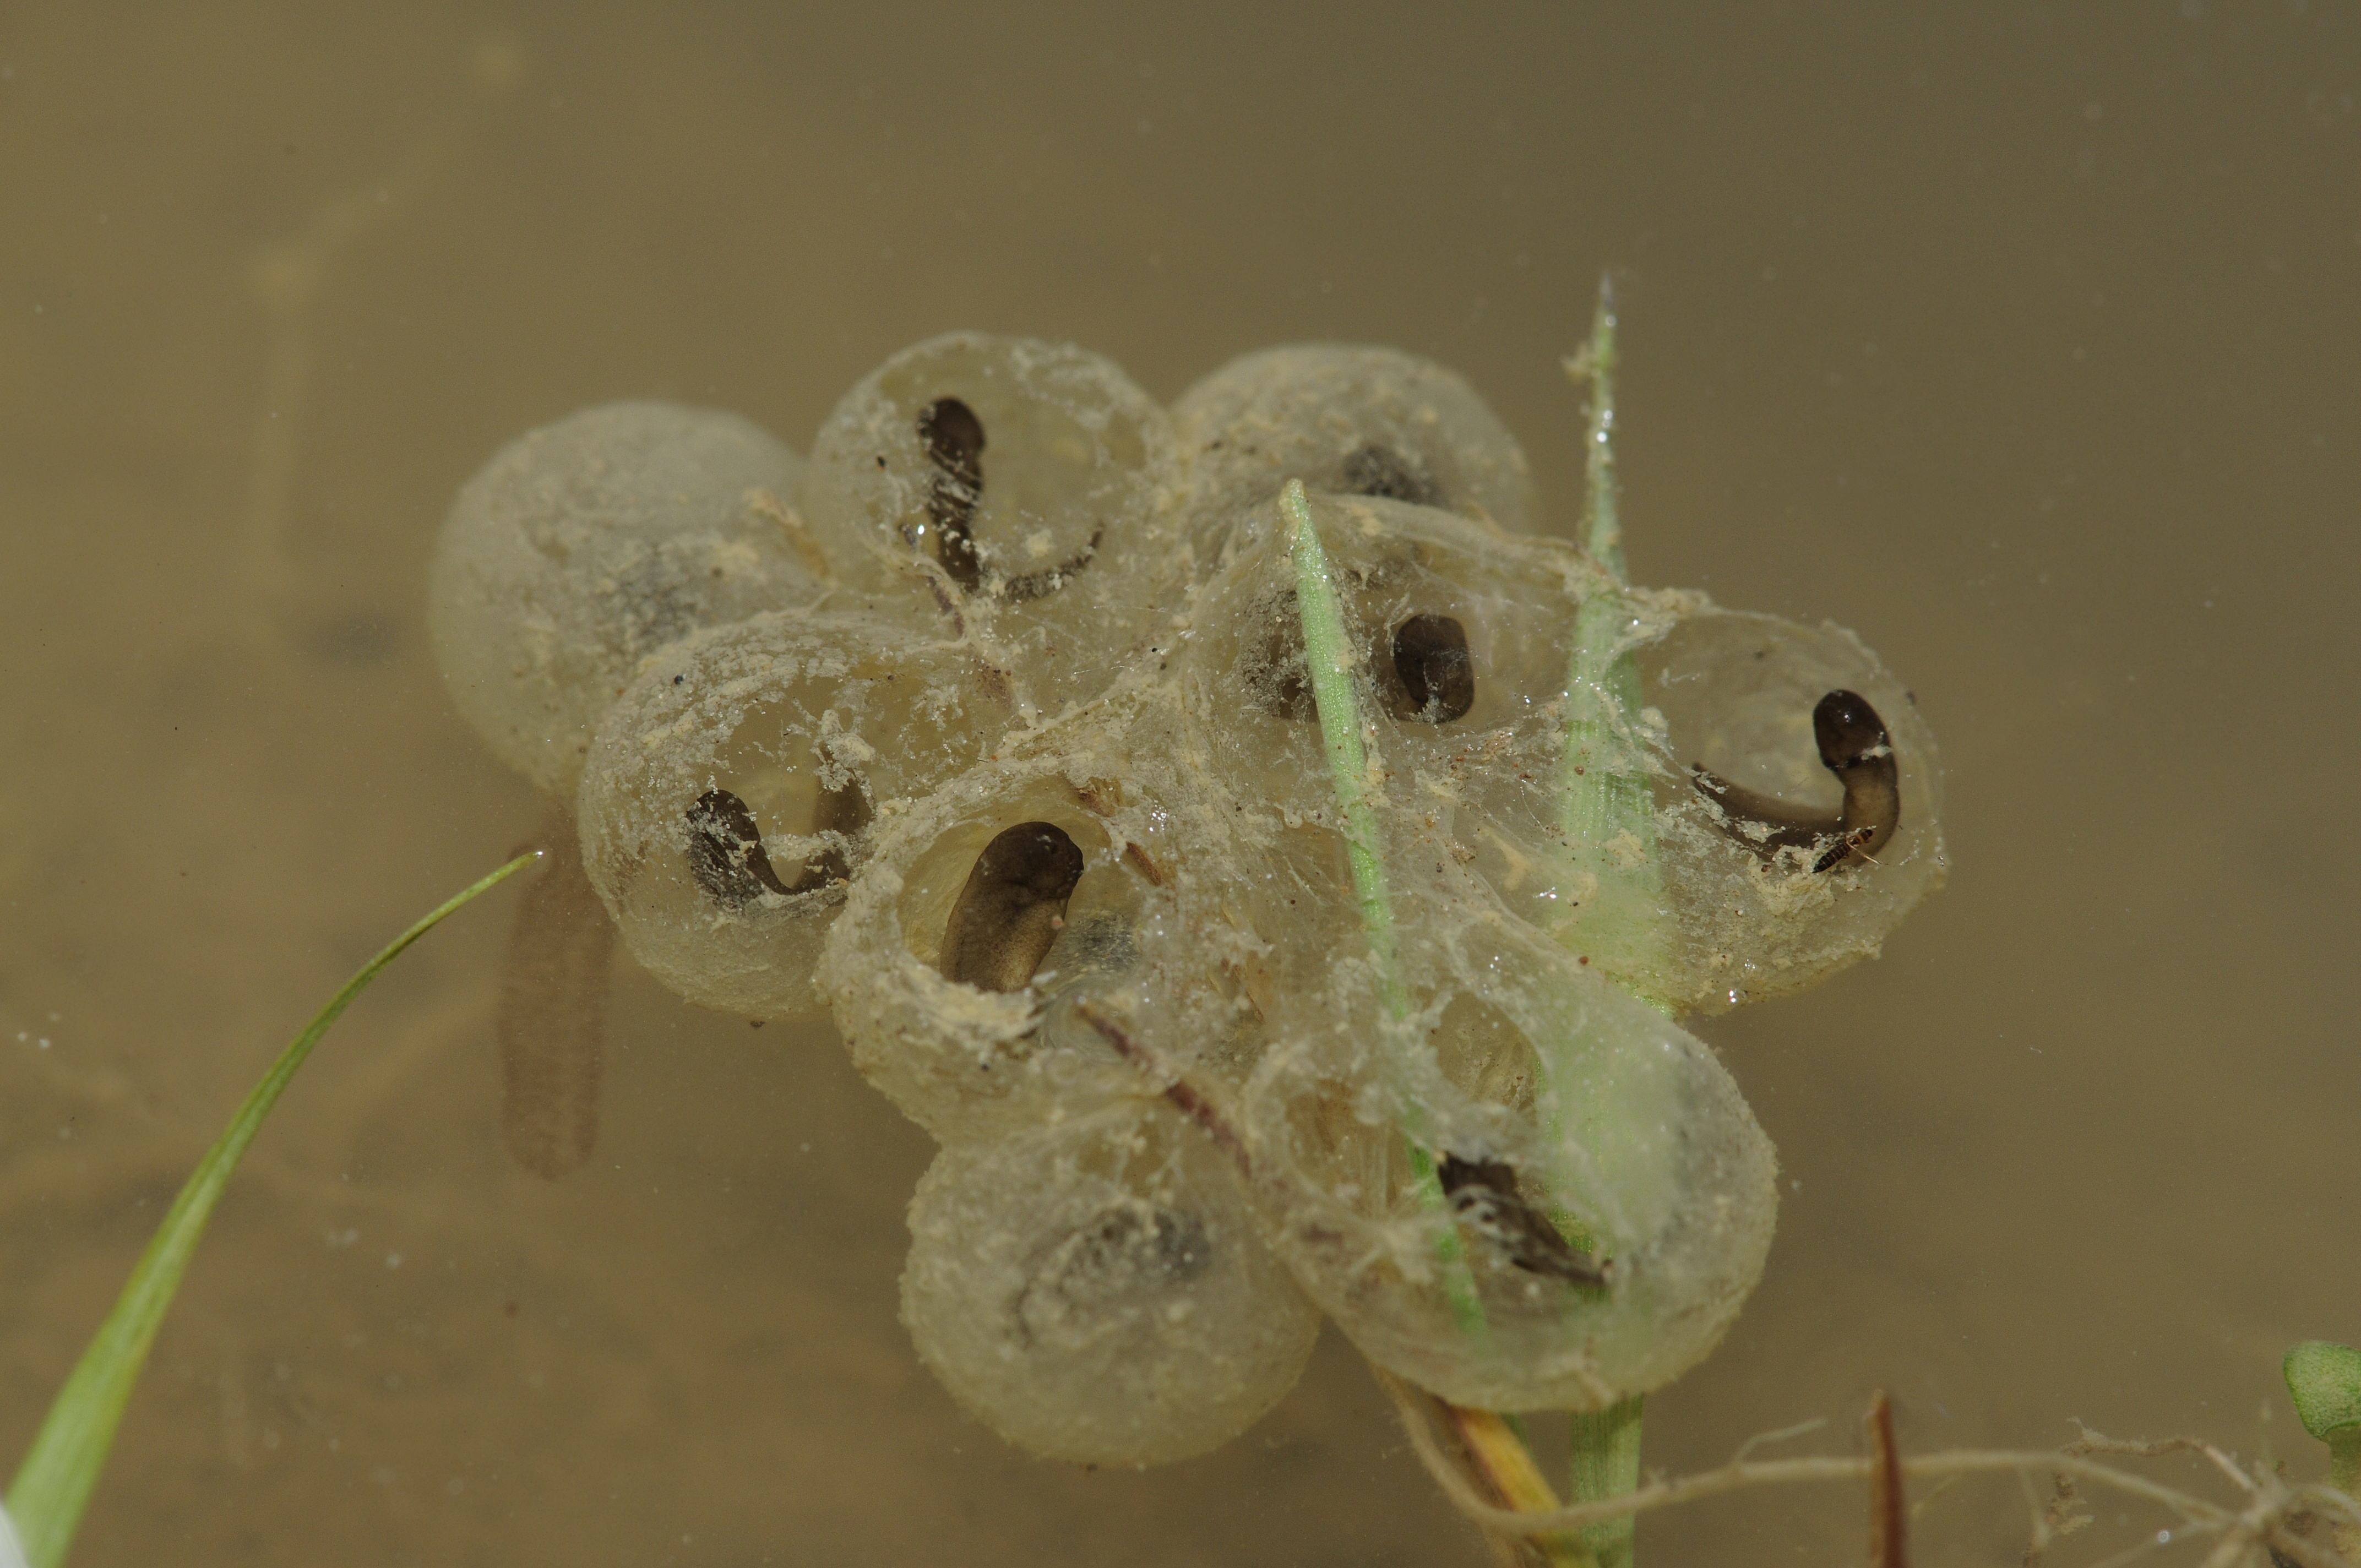 The reward of conservation efforts: Yellow-bellied toad spawn in newly created biotope | Benny Trapp